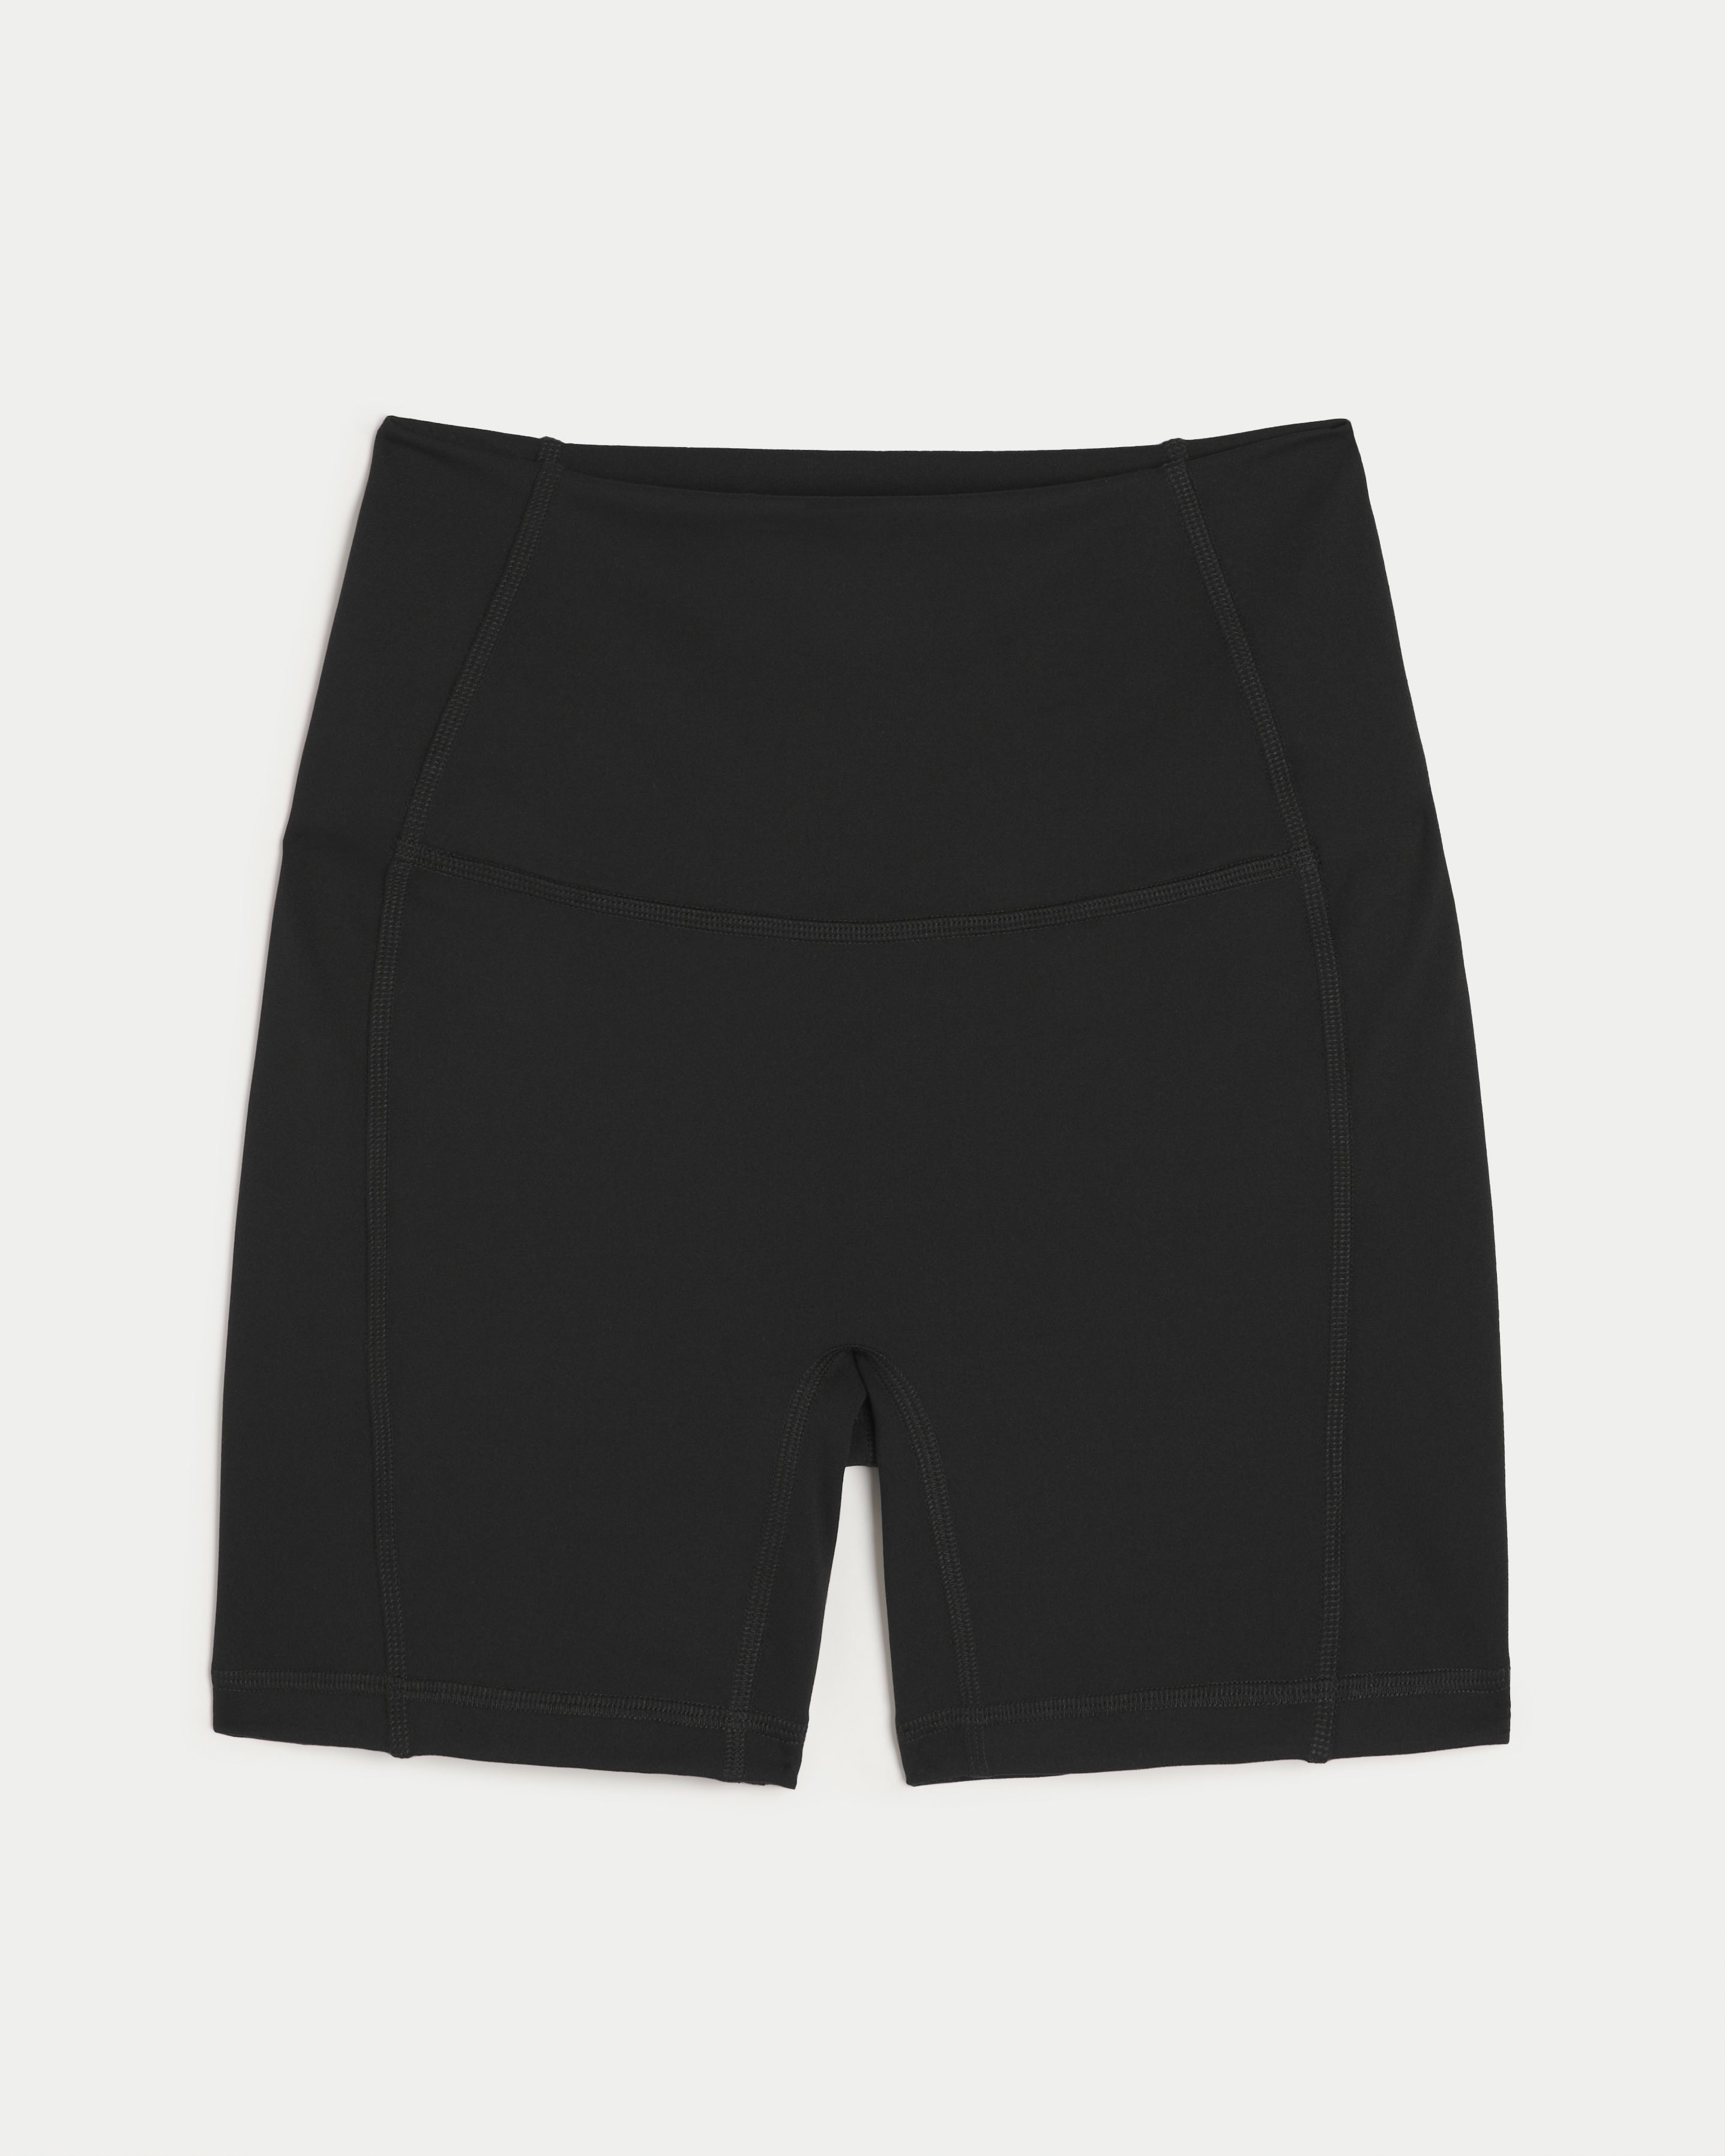 Gilly Hicks Active Boost Bike Shorts 5"